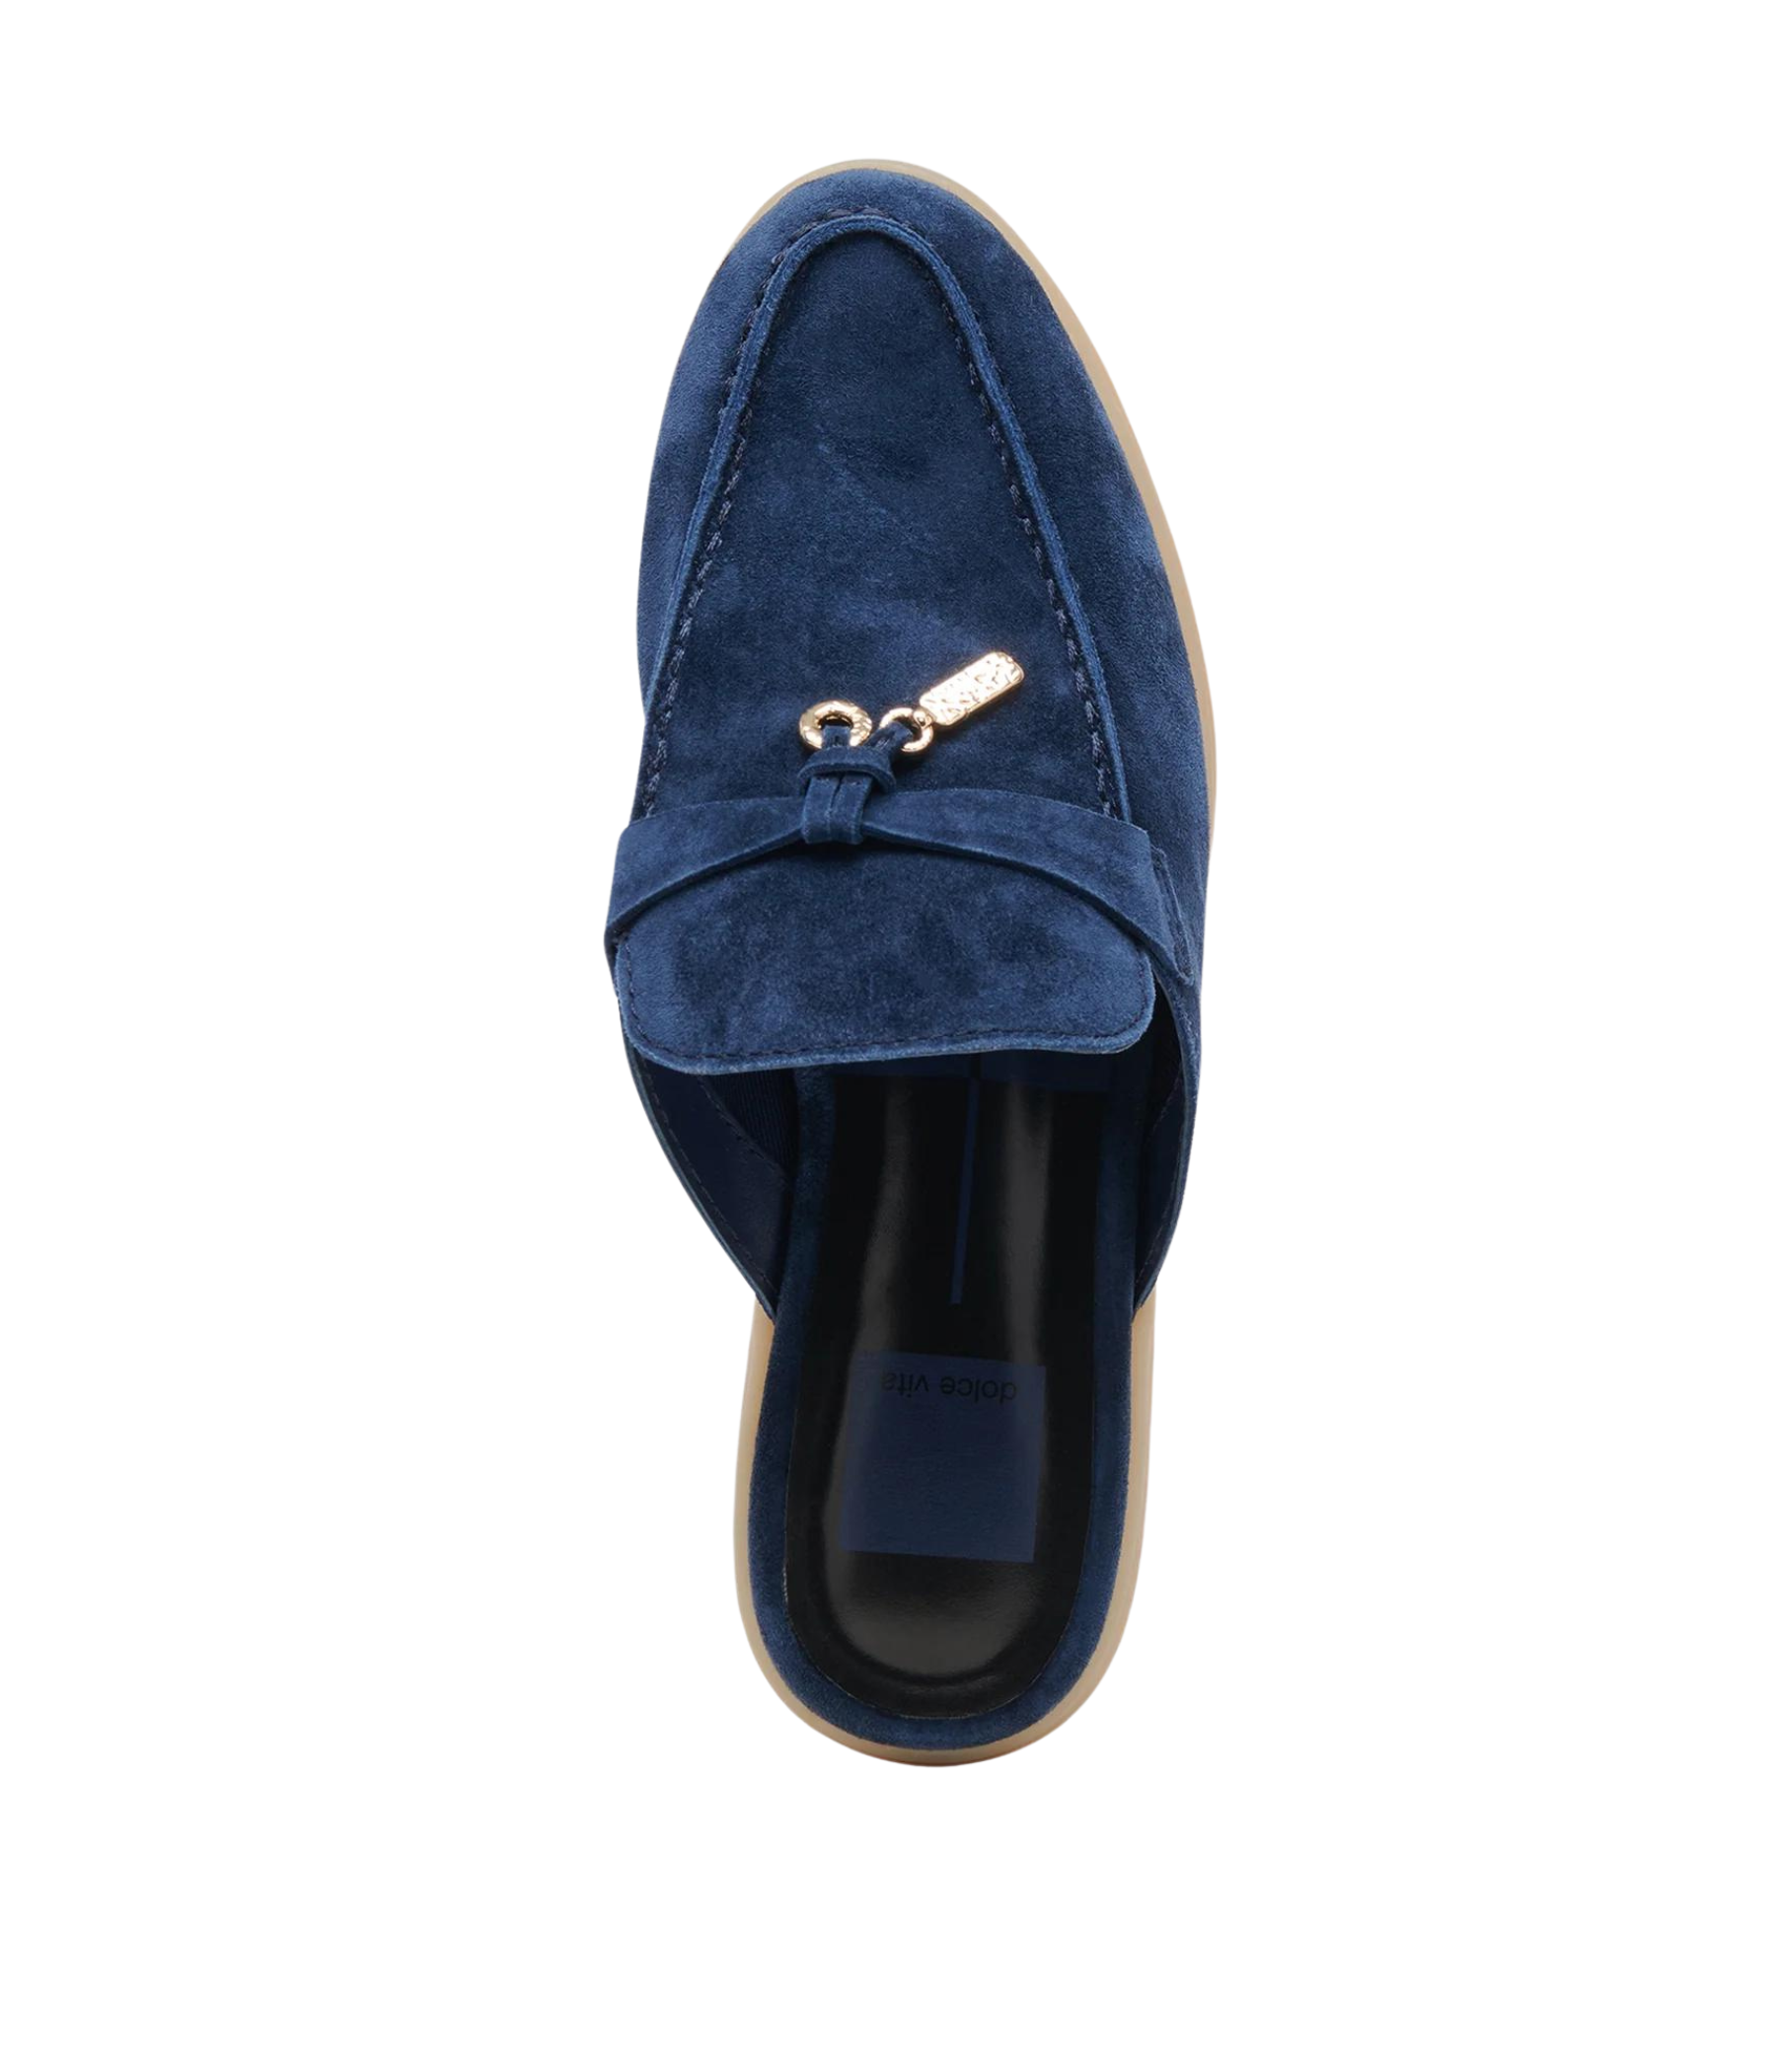 Lasail Flats in Navy Suede